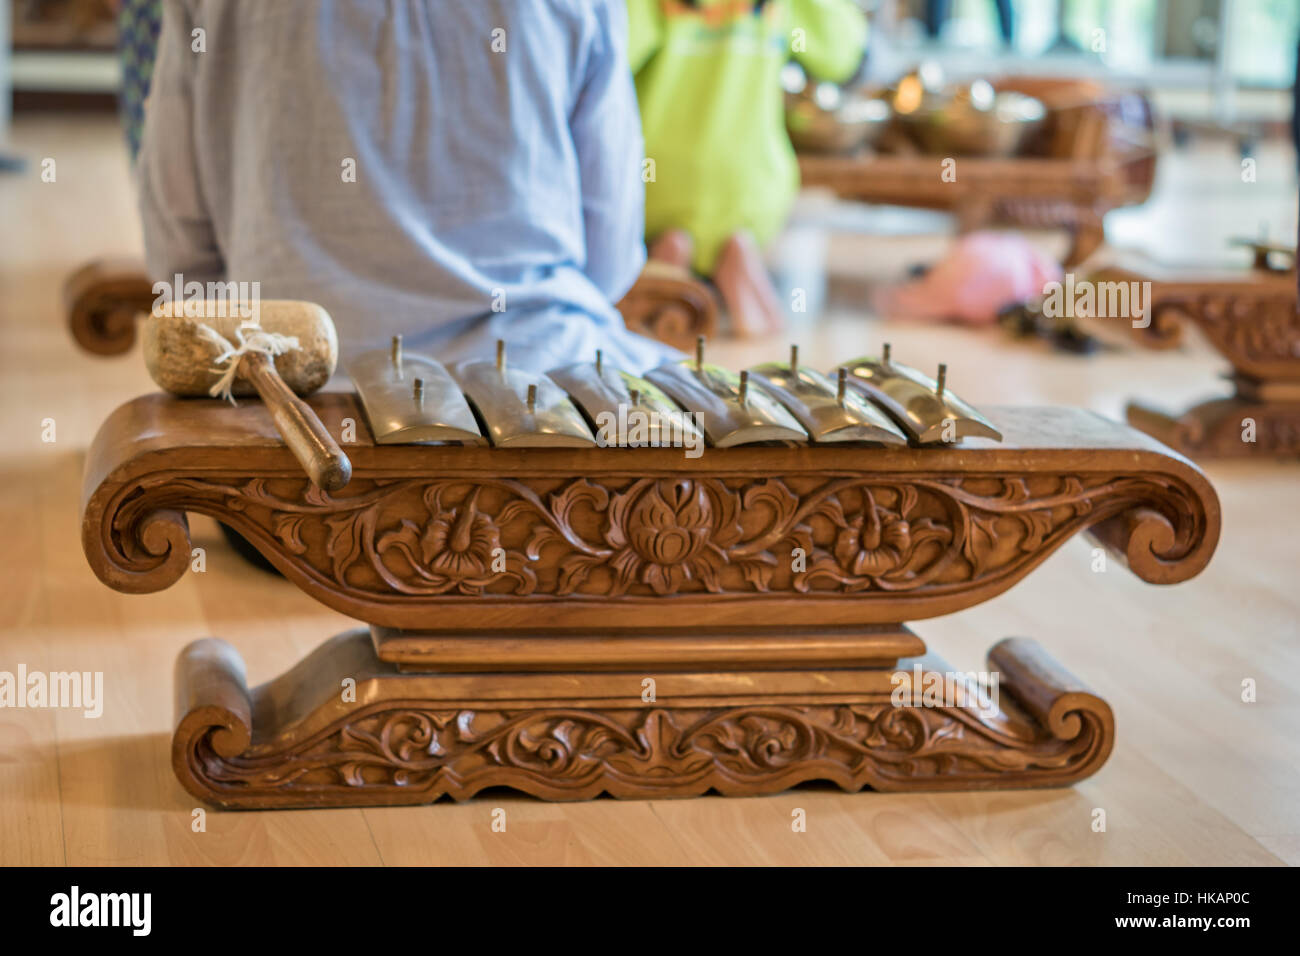 Type of Saron, a gamelan music instrument. Gamelan is traditional music in Bali and Java, Indonesia. Stock Photo